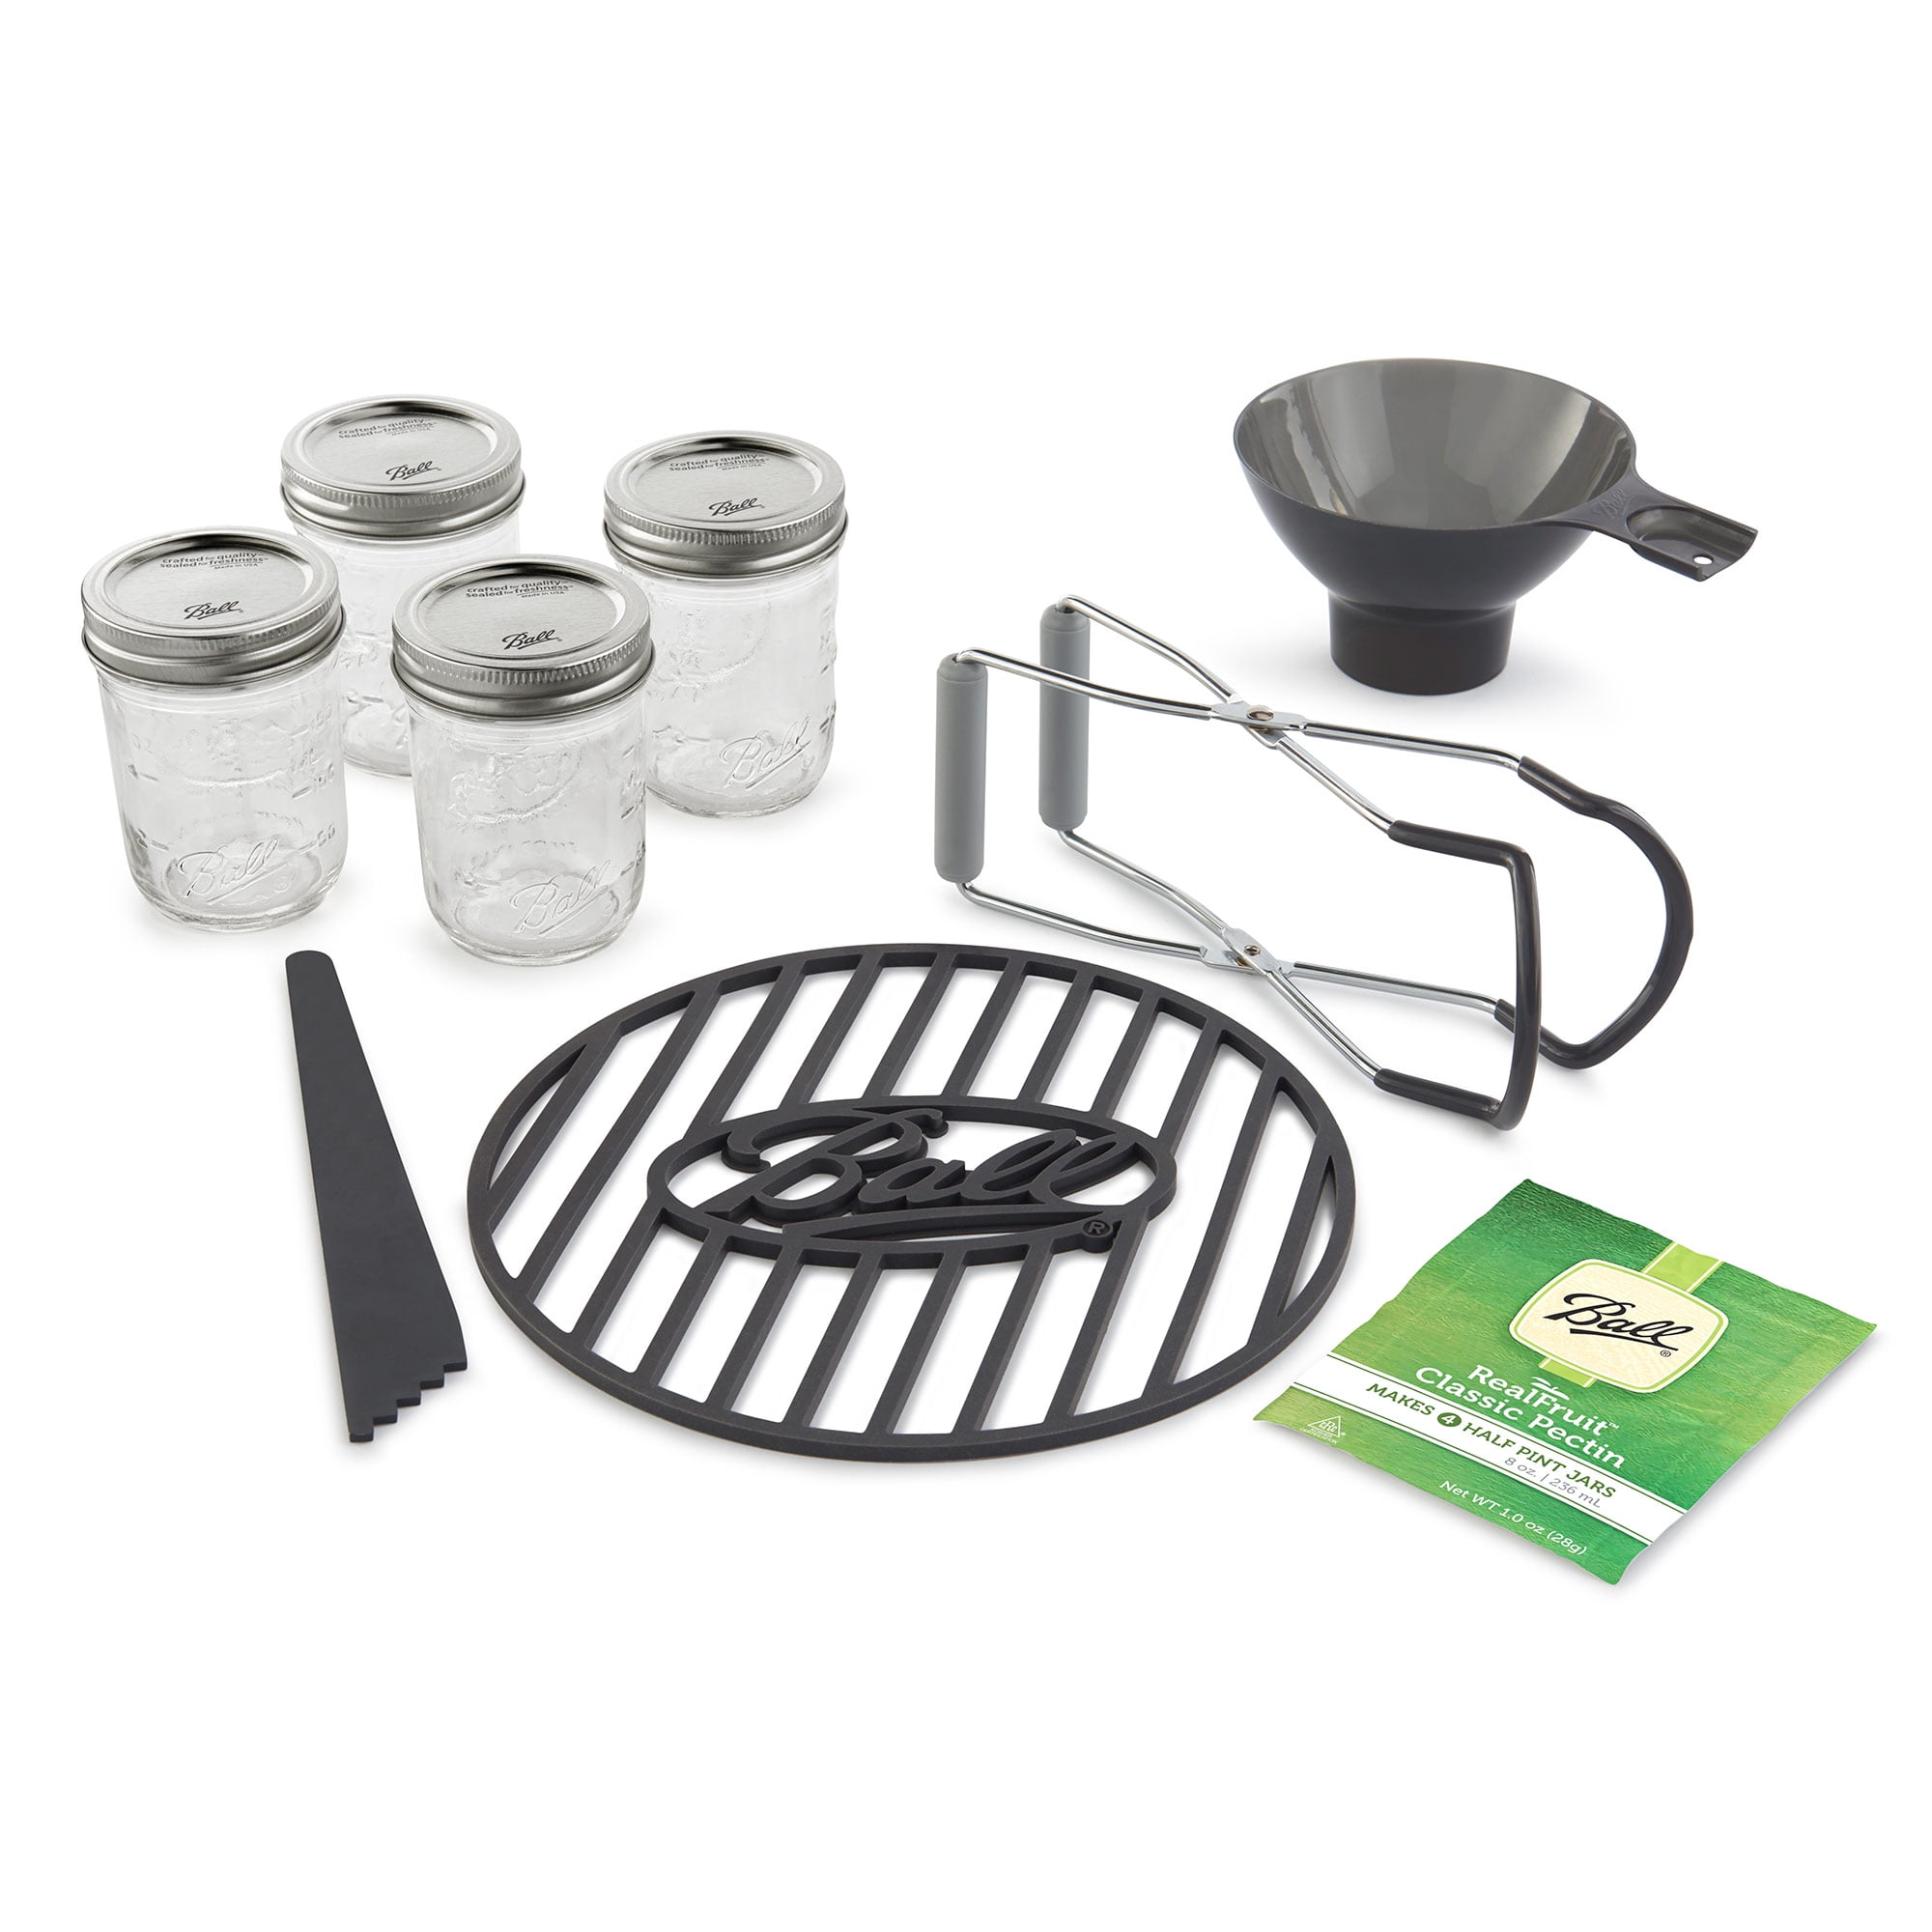  Canning Supplies Starter Kit, 68pcs All-in-one Canning